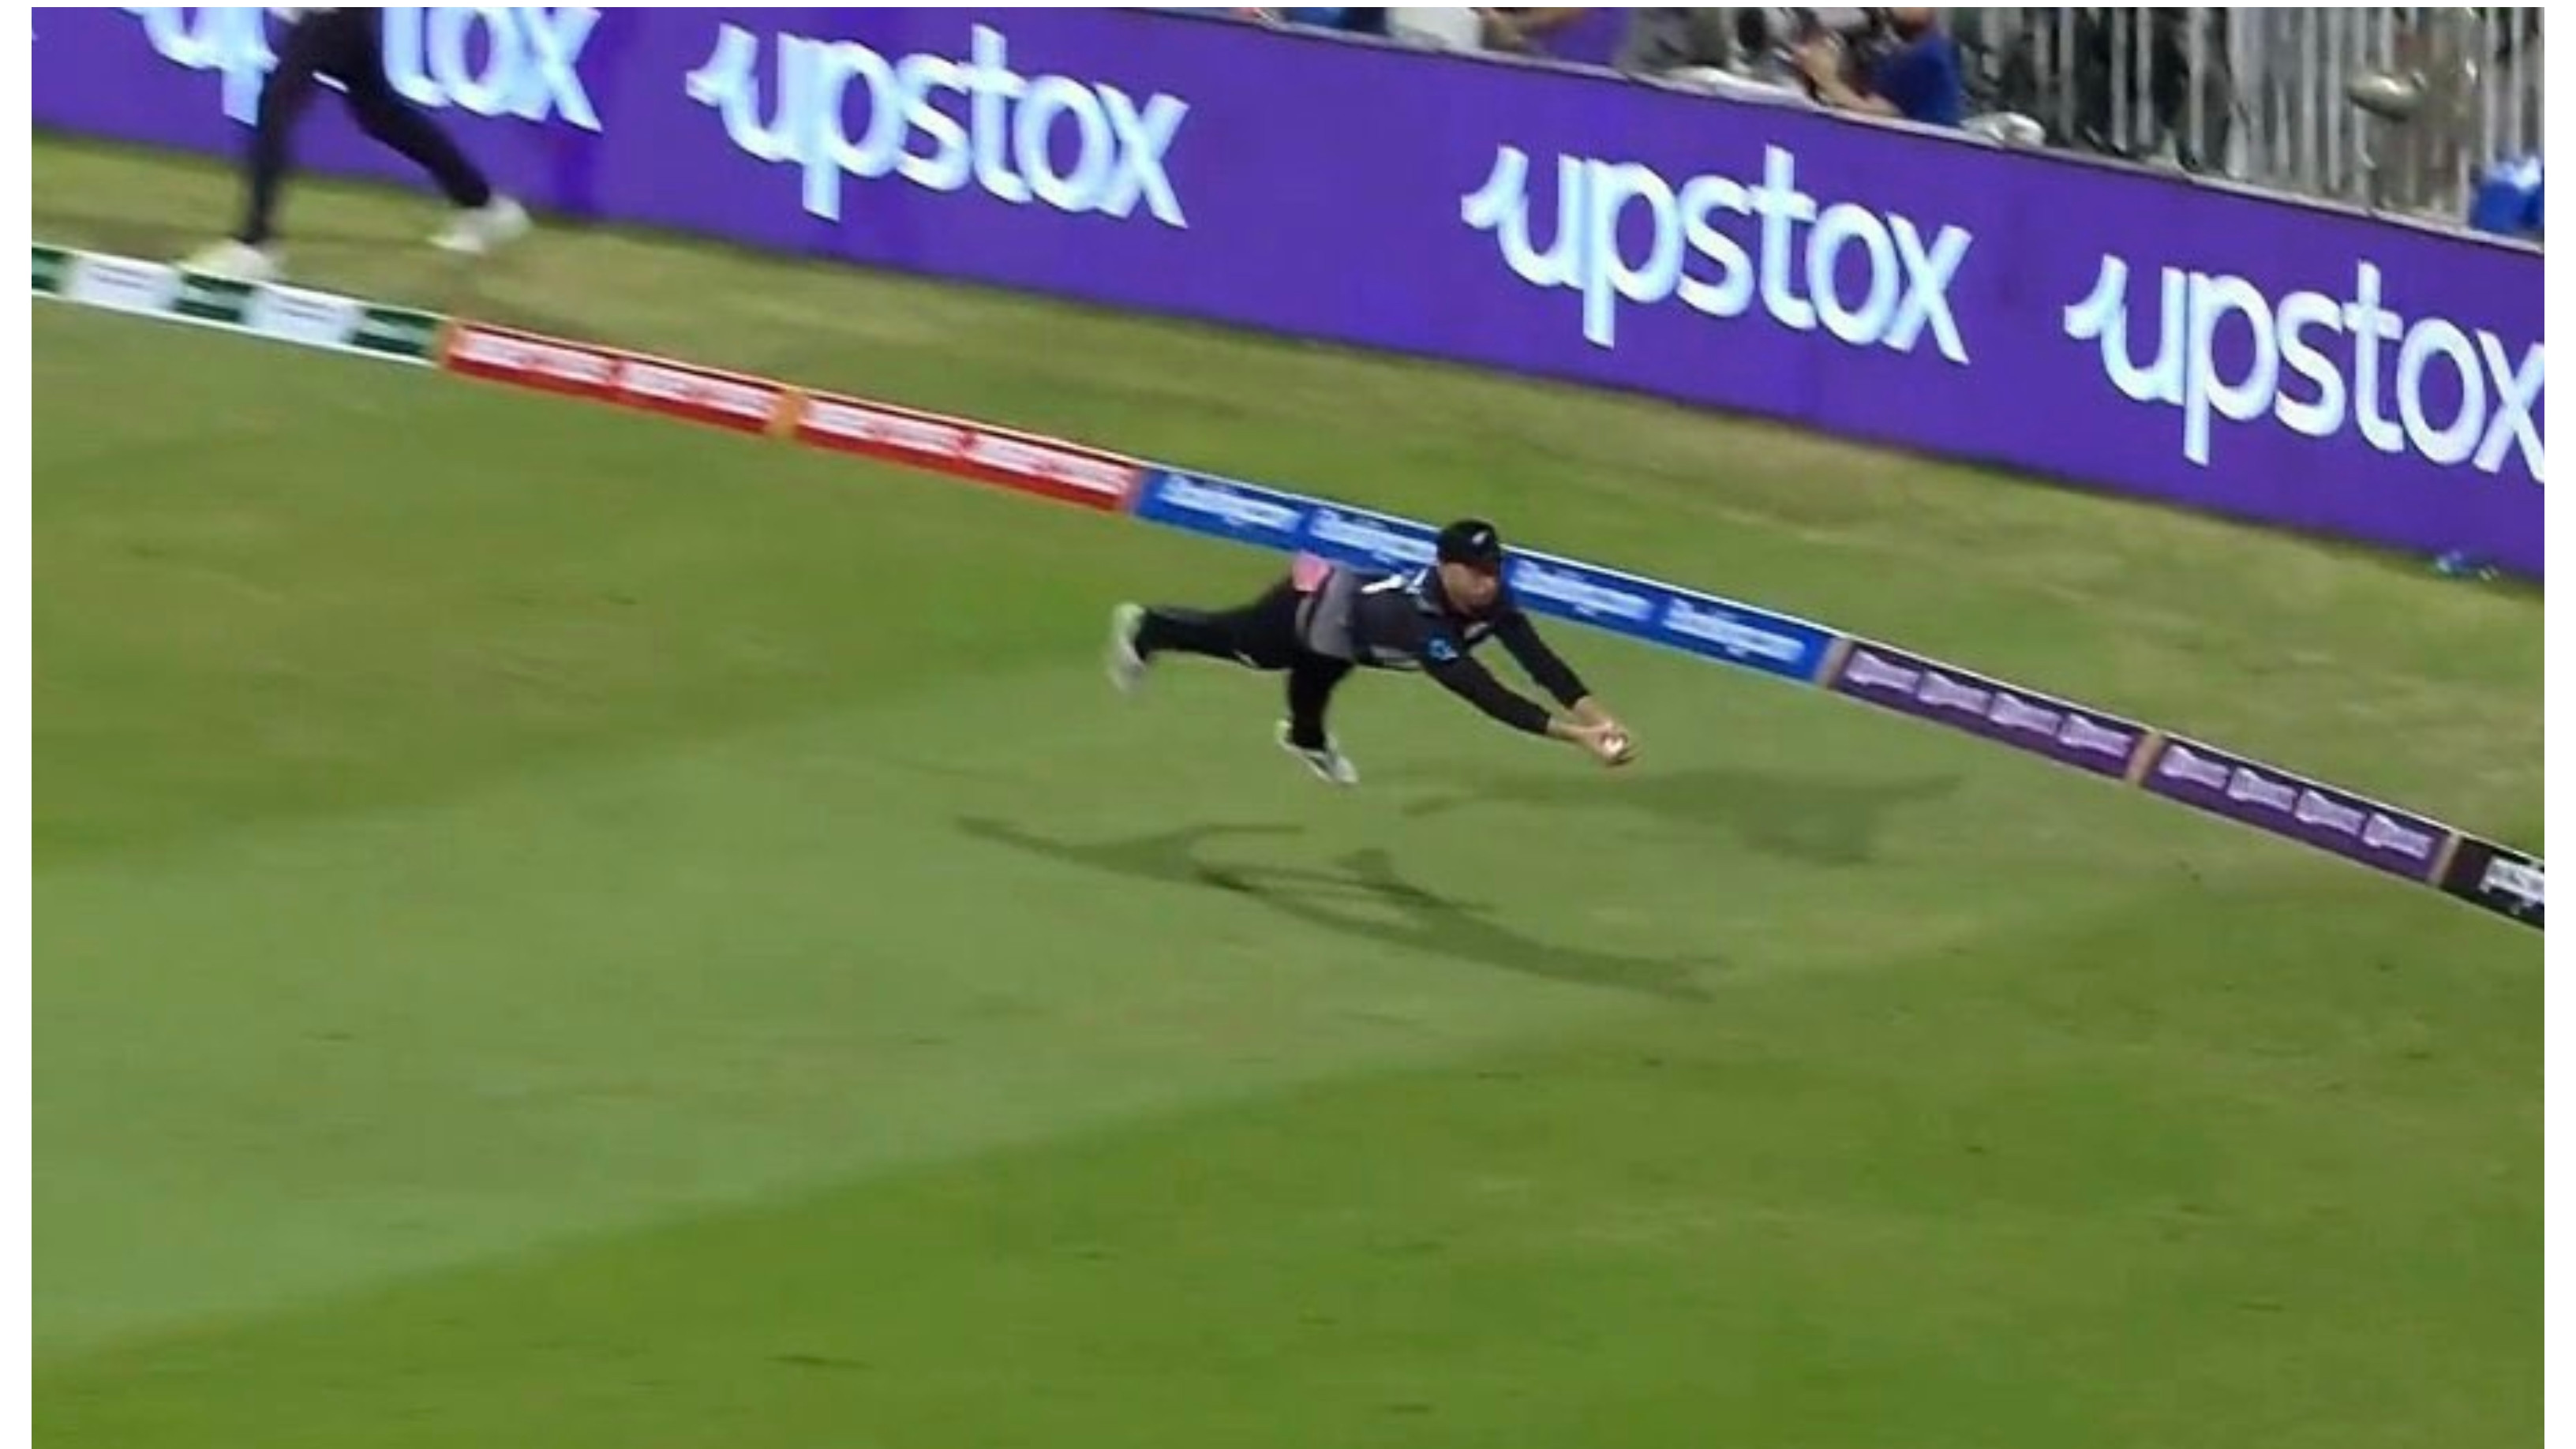 T20 World Cup 2021: WATCH – Devon Conway grabs a stunner out of thin air to dismiss Mohammad Hafeez